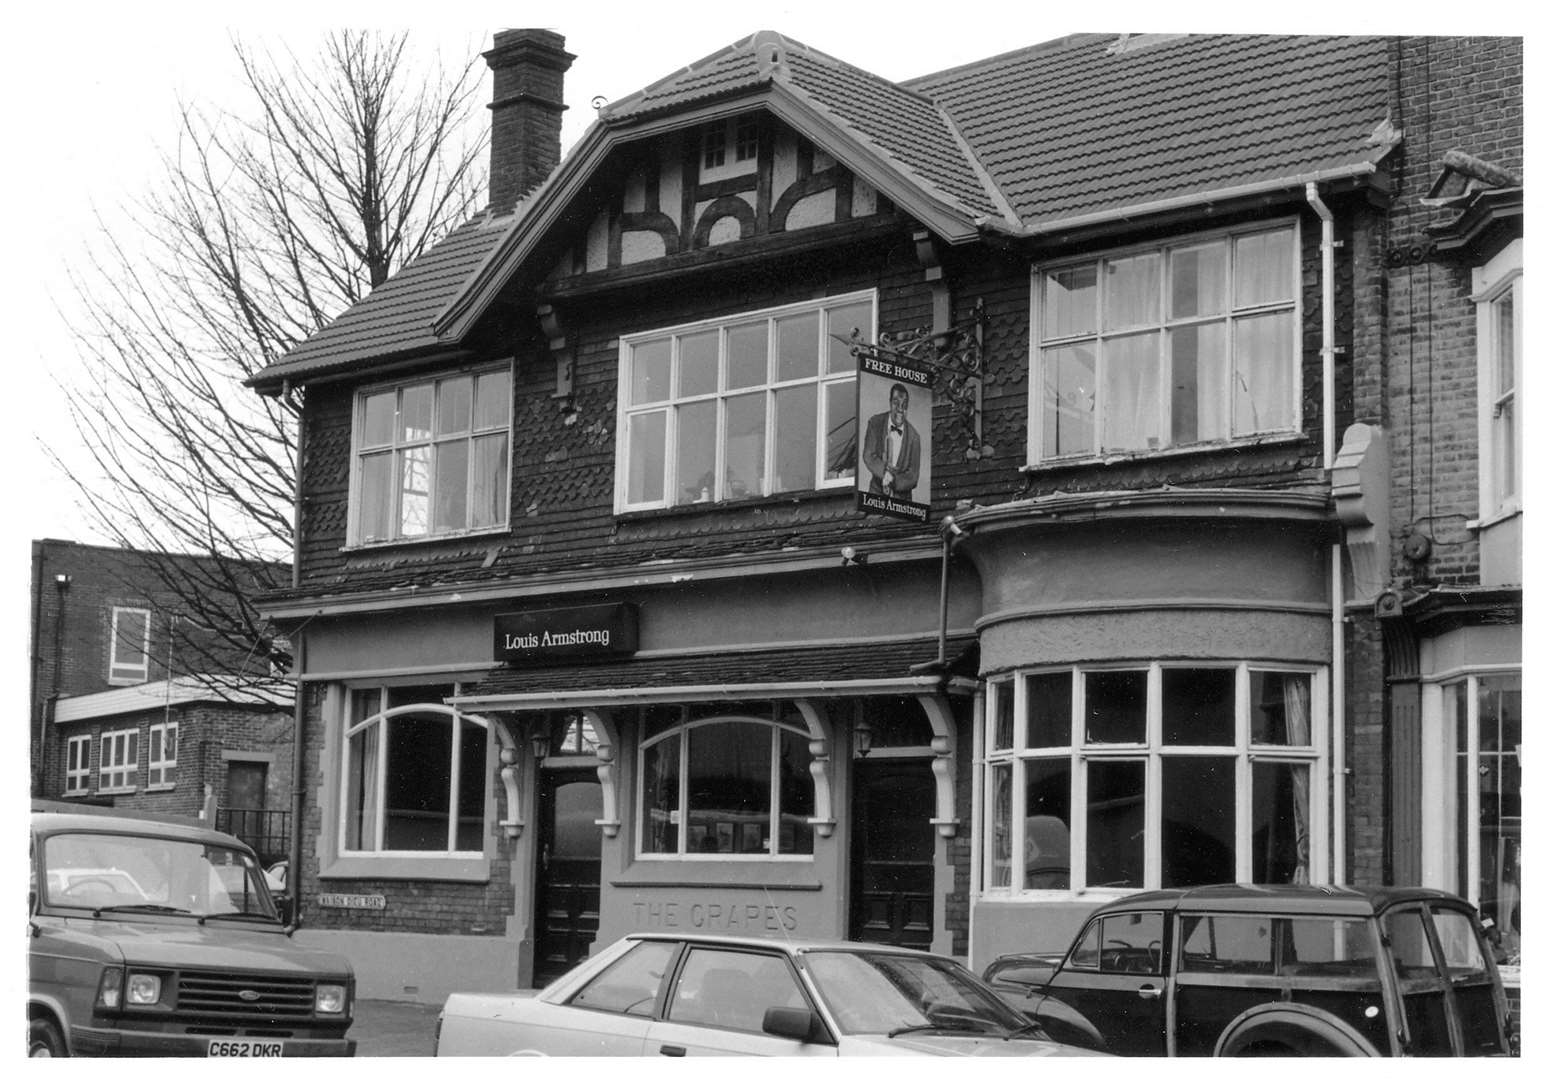 The Louis Armstrong Pub, taken in 1990, courtesy of Dover Museum